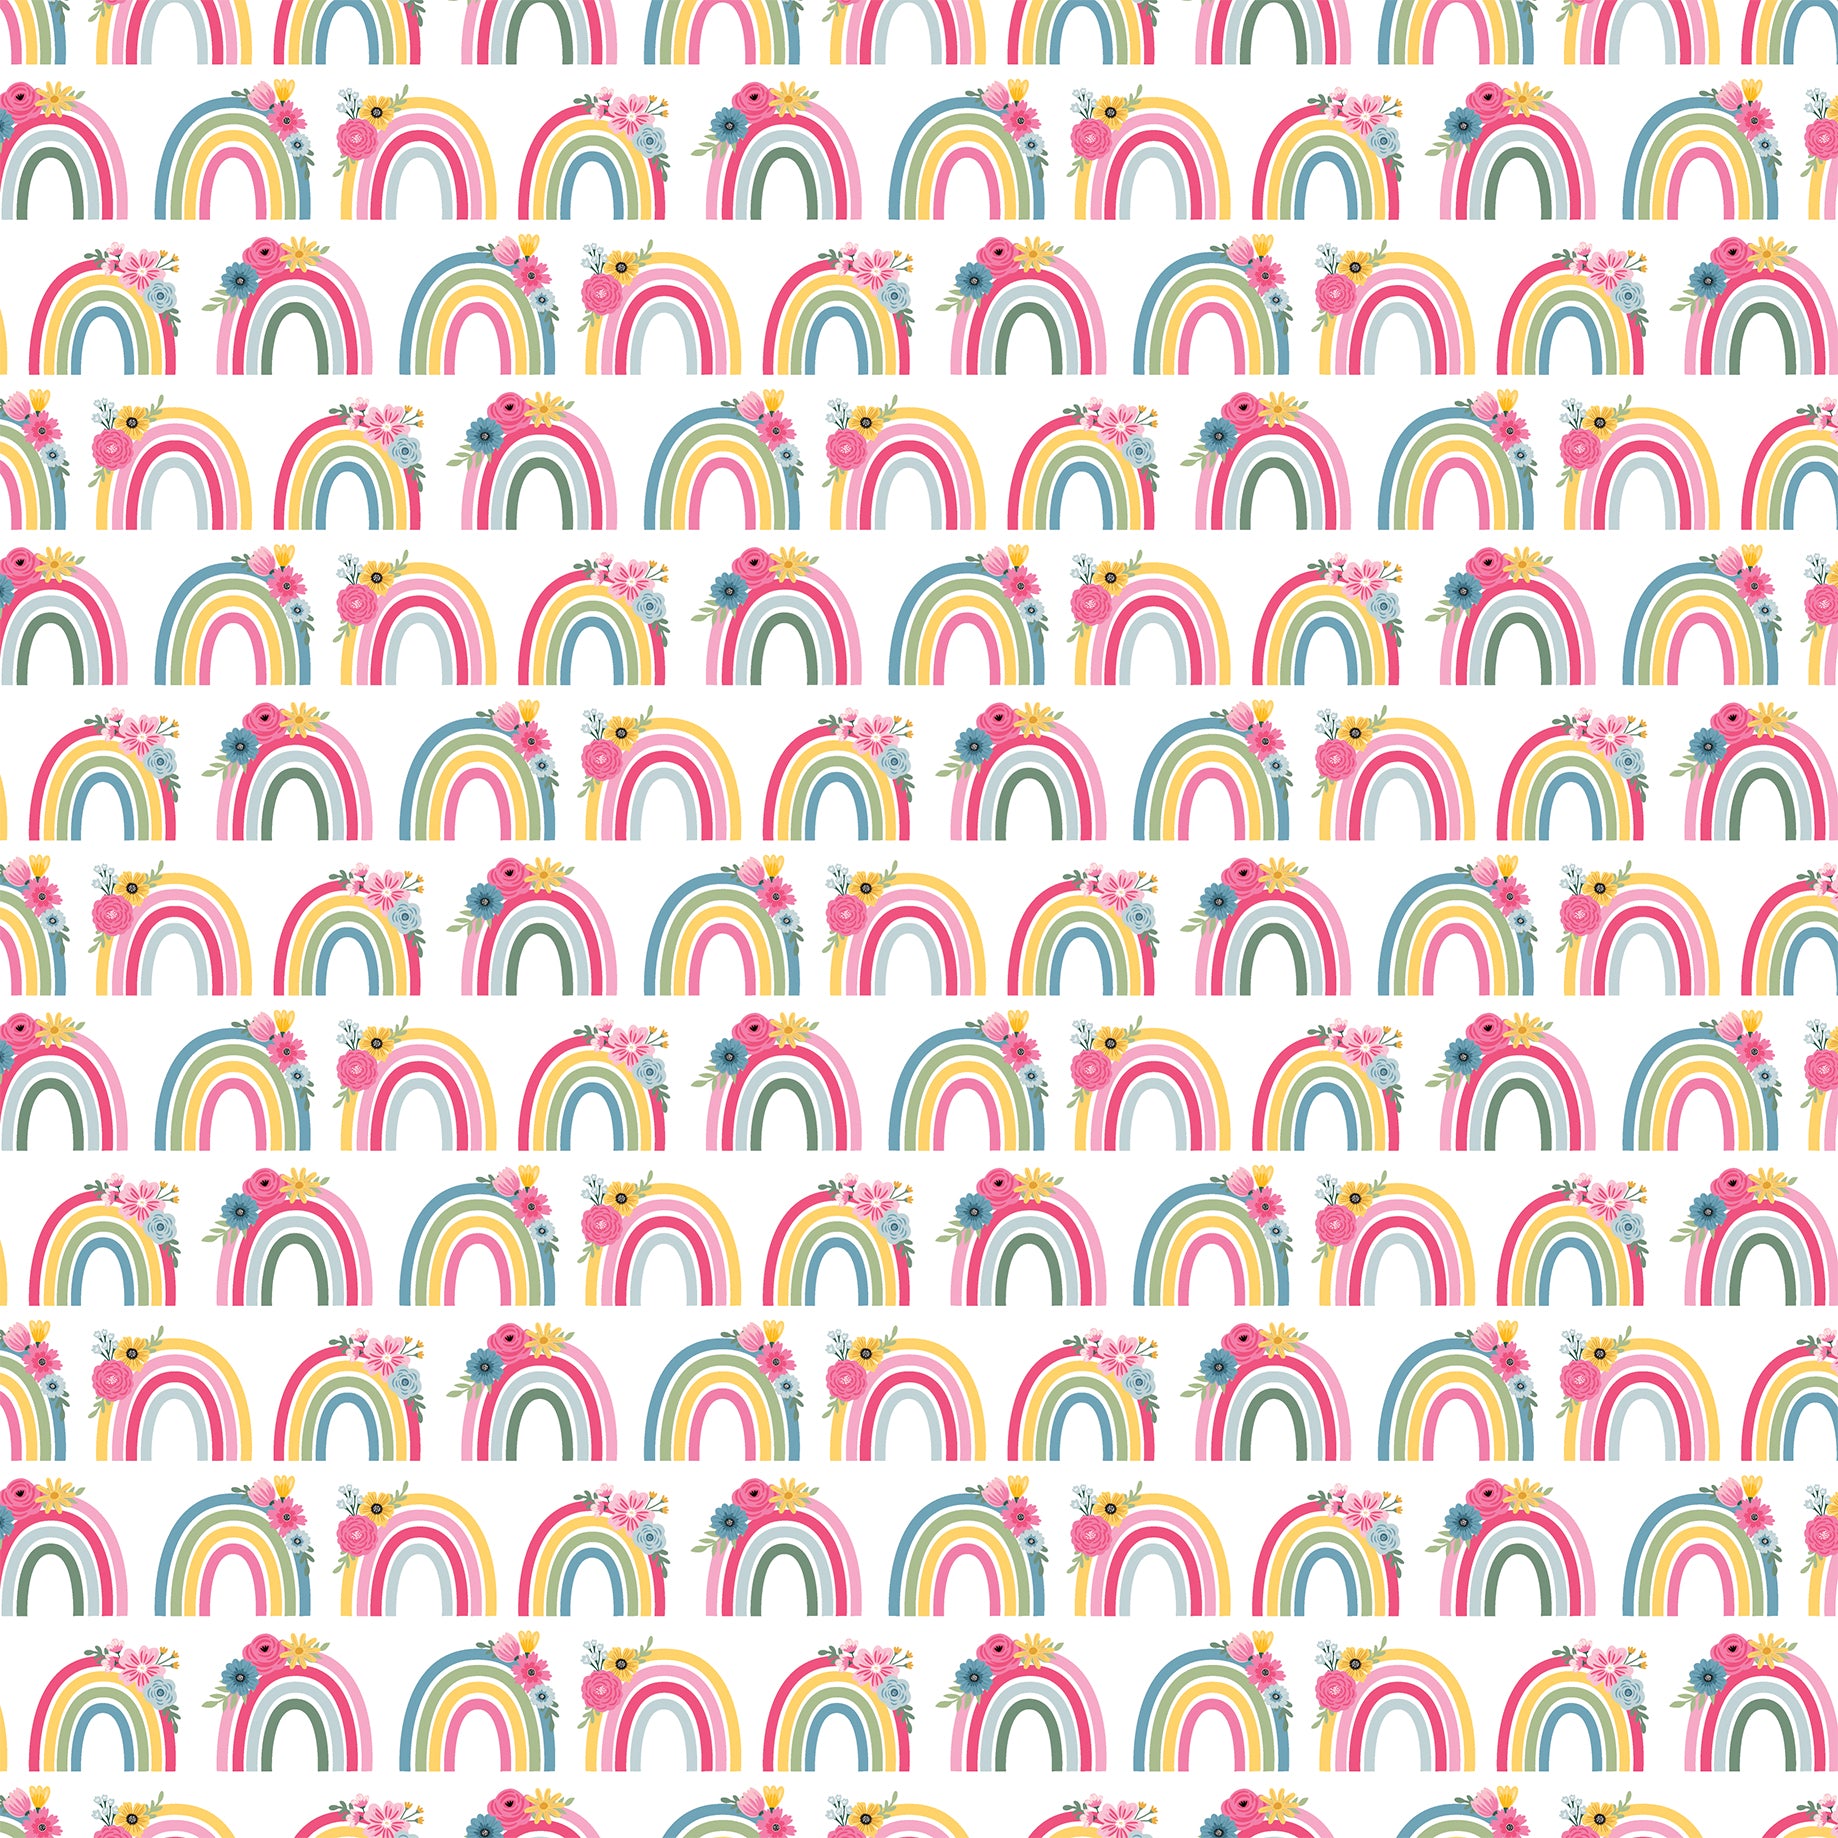 Fairy Garden Collection Garden Rainbows 12 x 12 Double-Sided Scrapbook Paper by Echo Park Paper